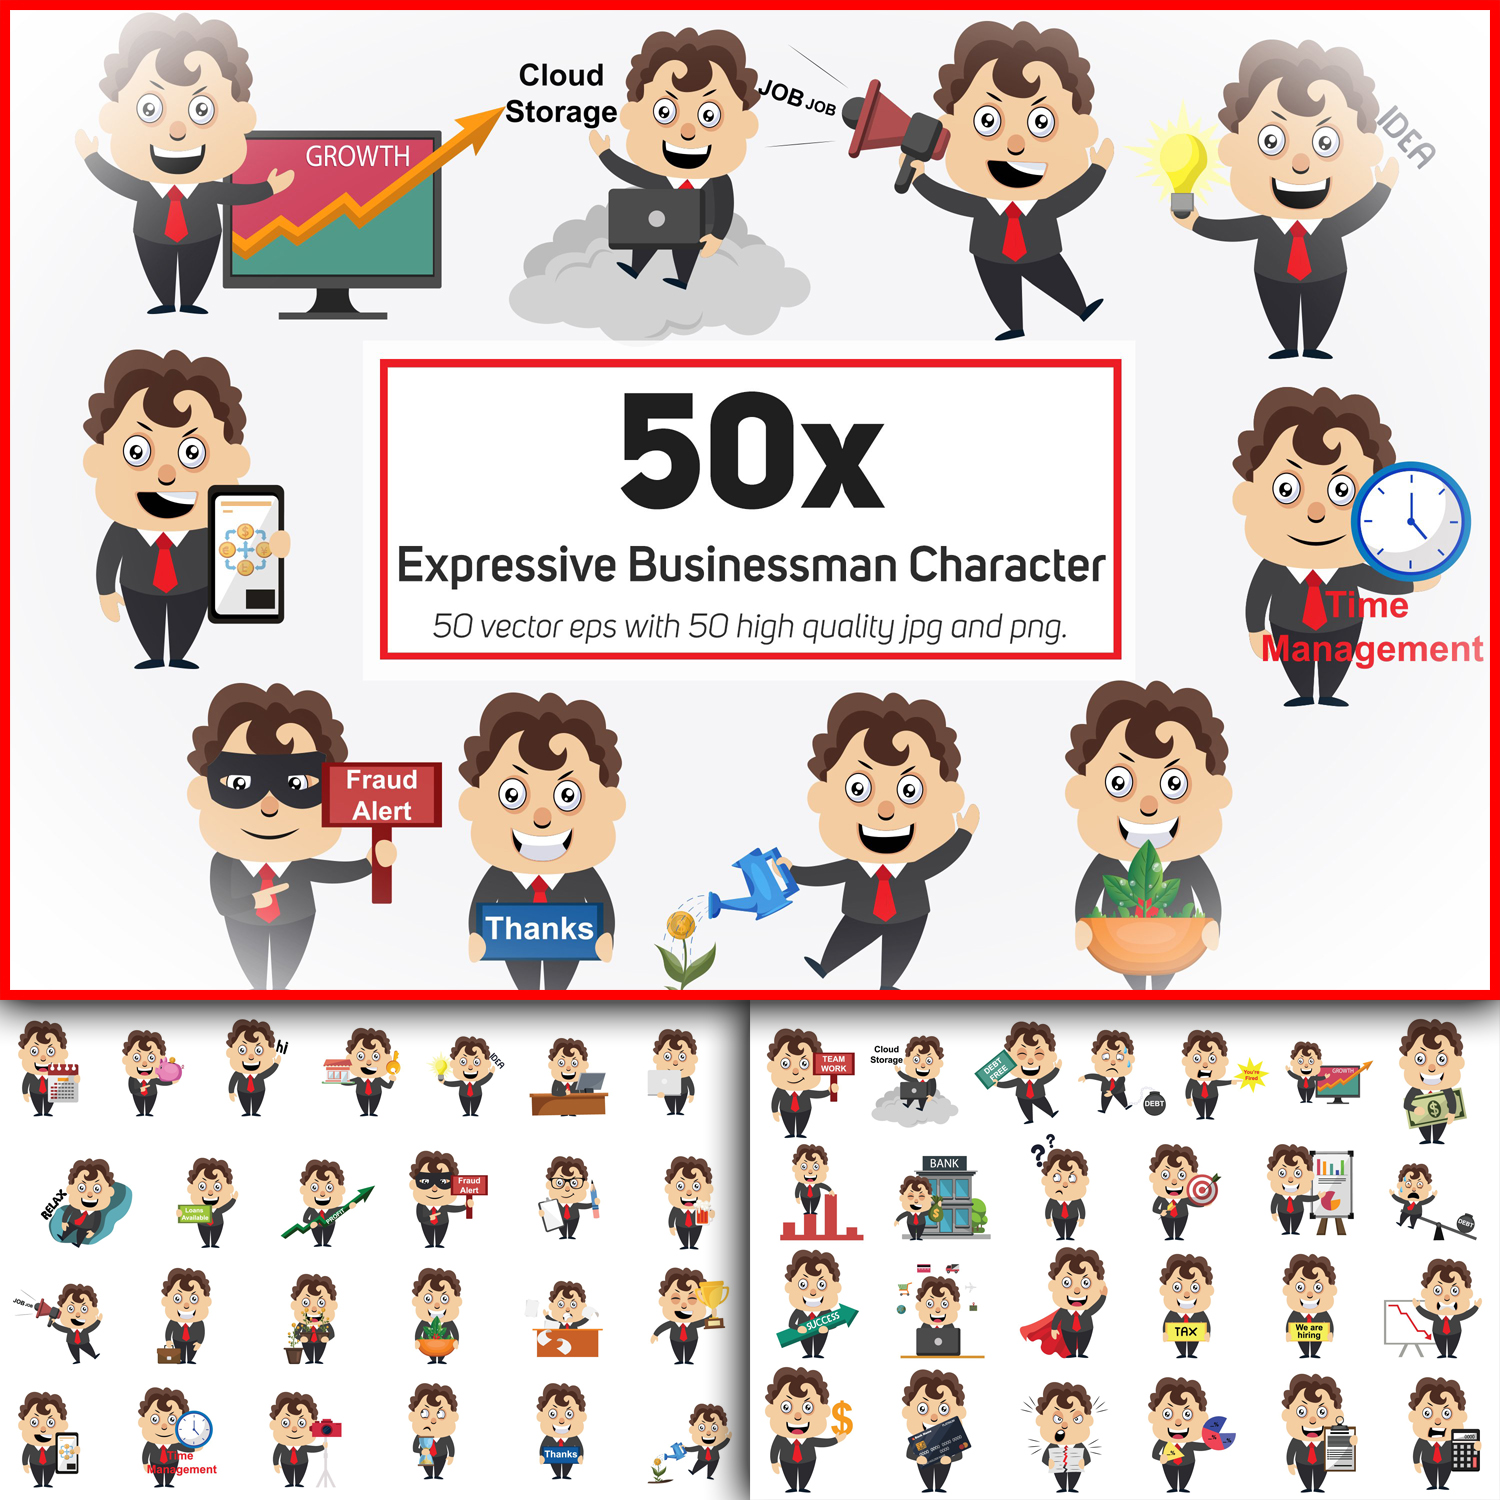 50x Expressive Businessman Character Collection illustration cover.